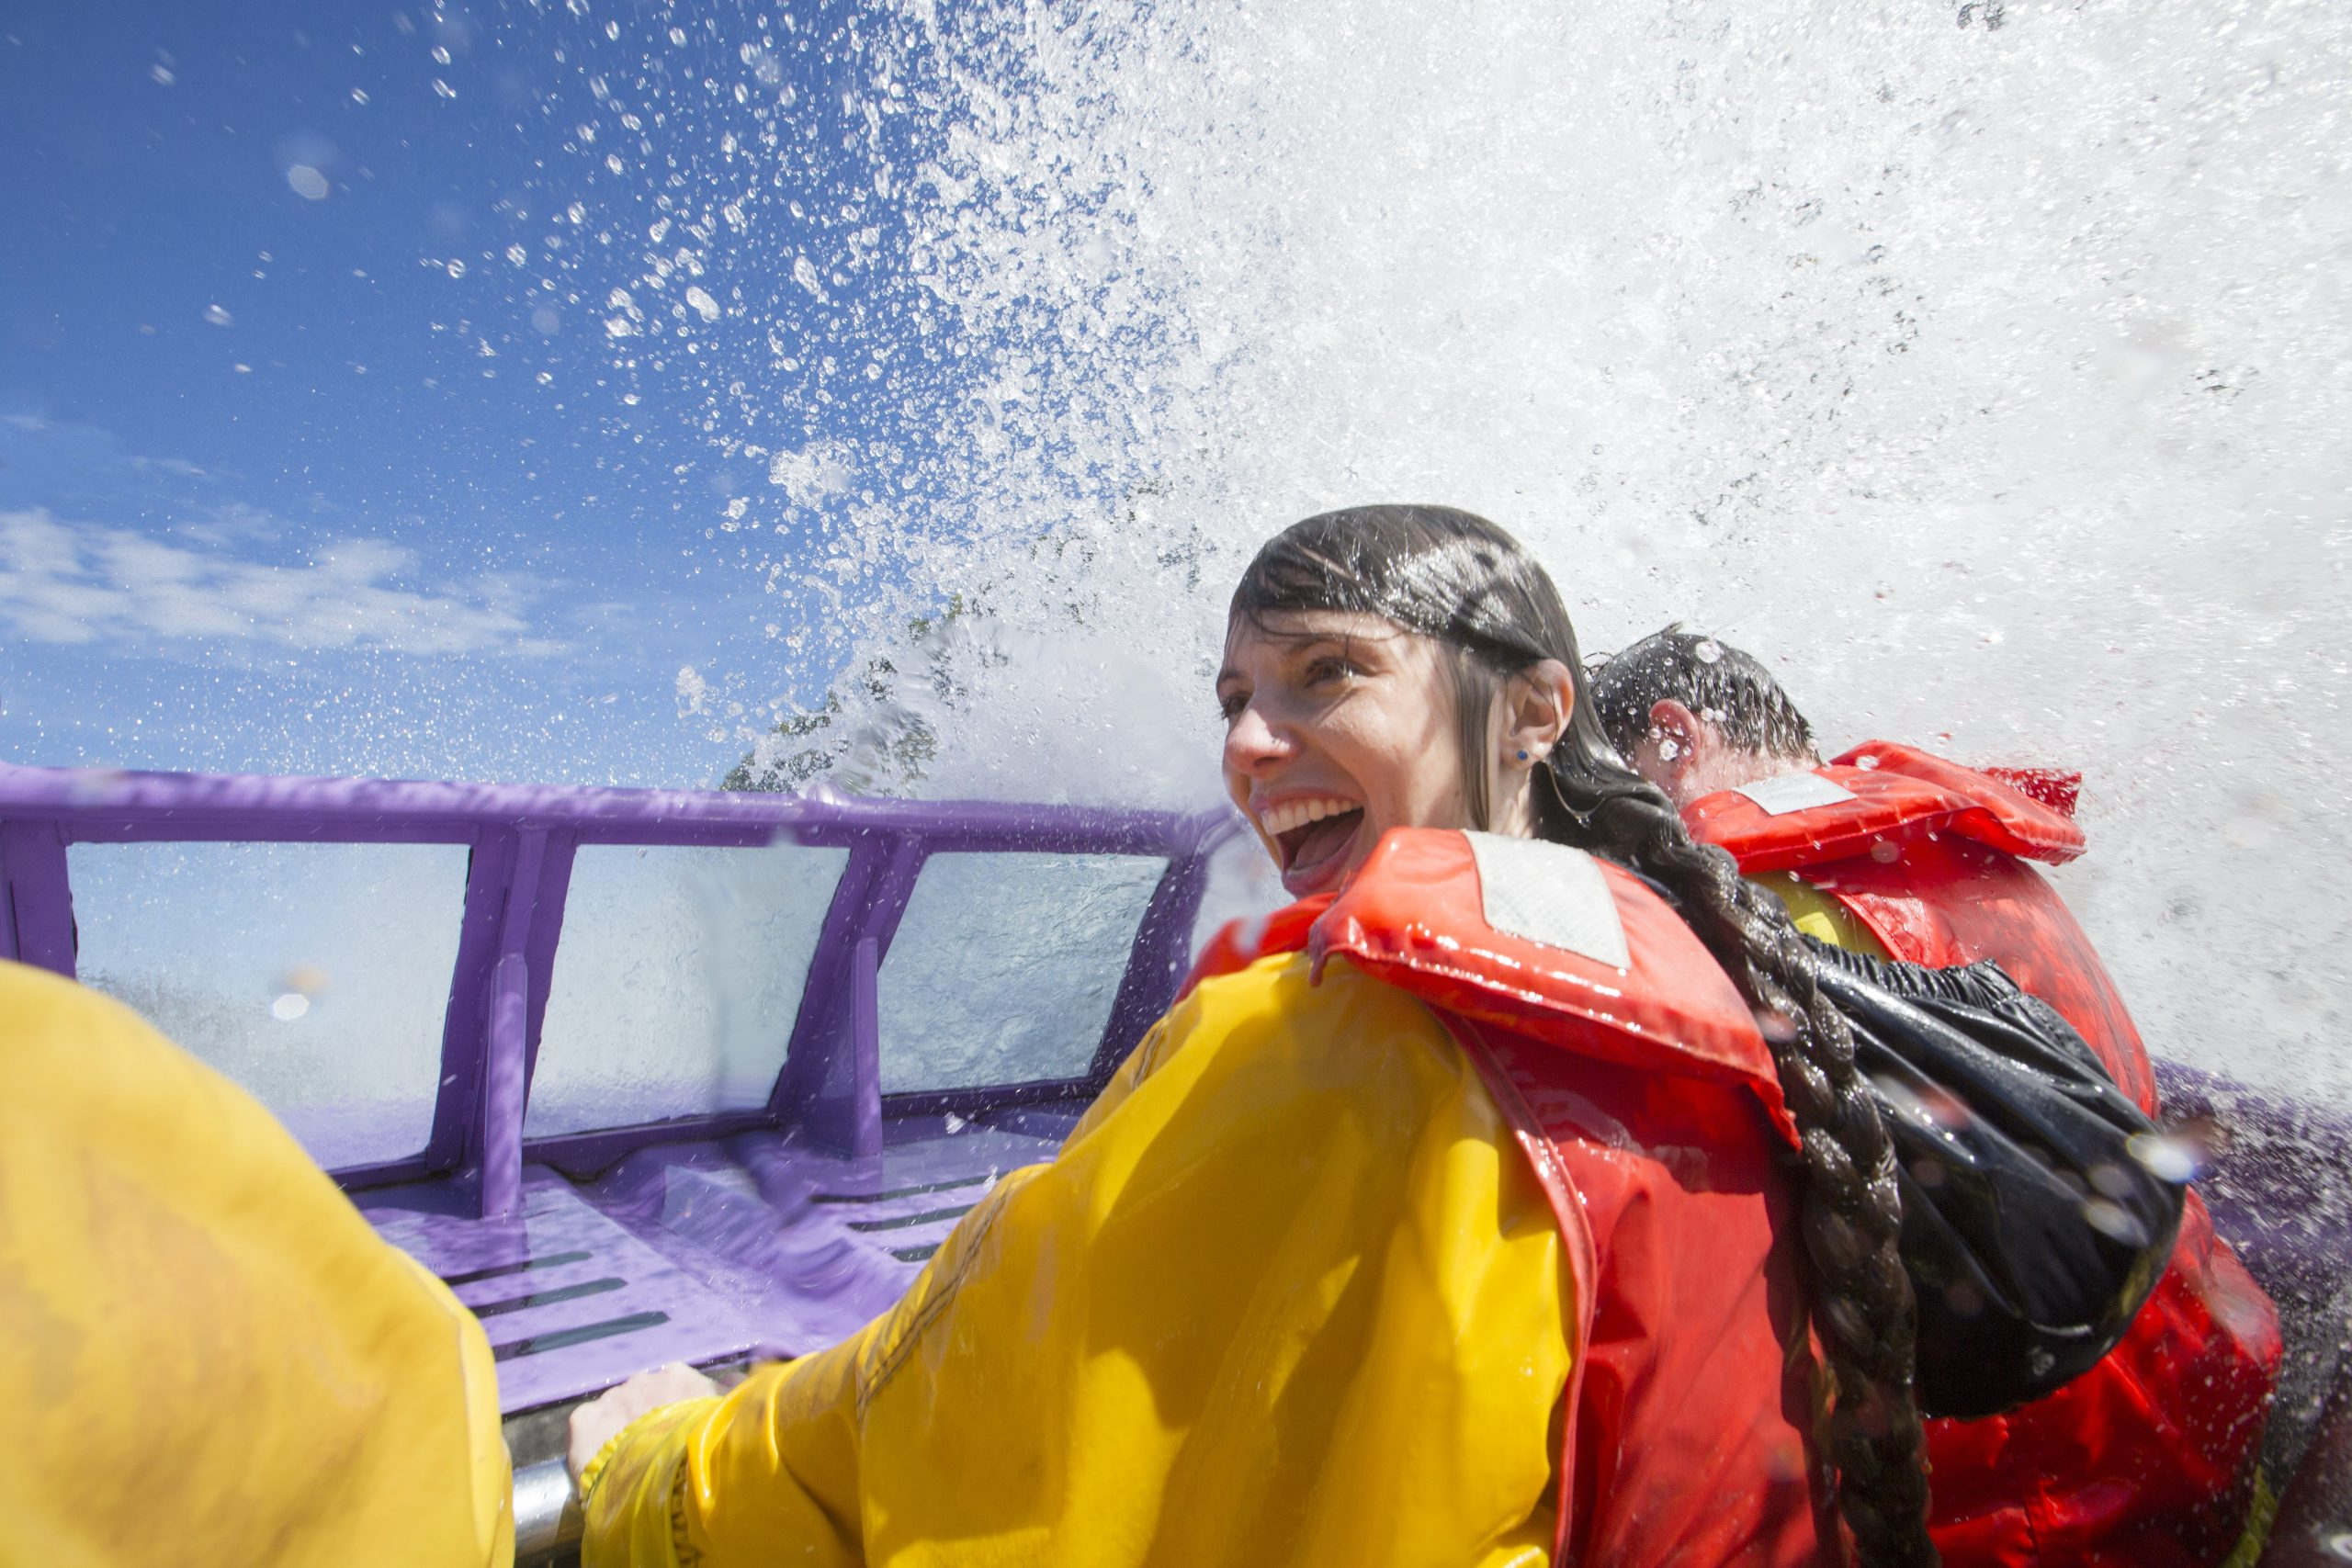 Get up close to the falls on a jet boat.